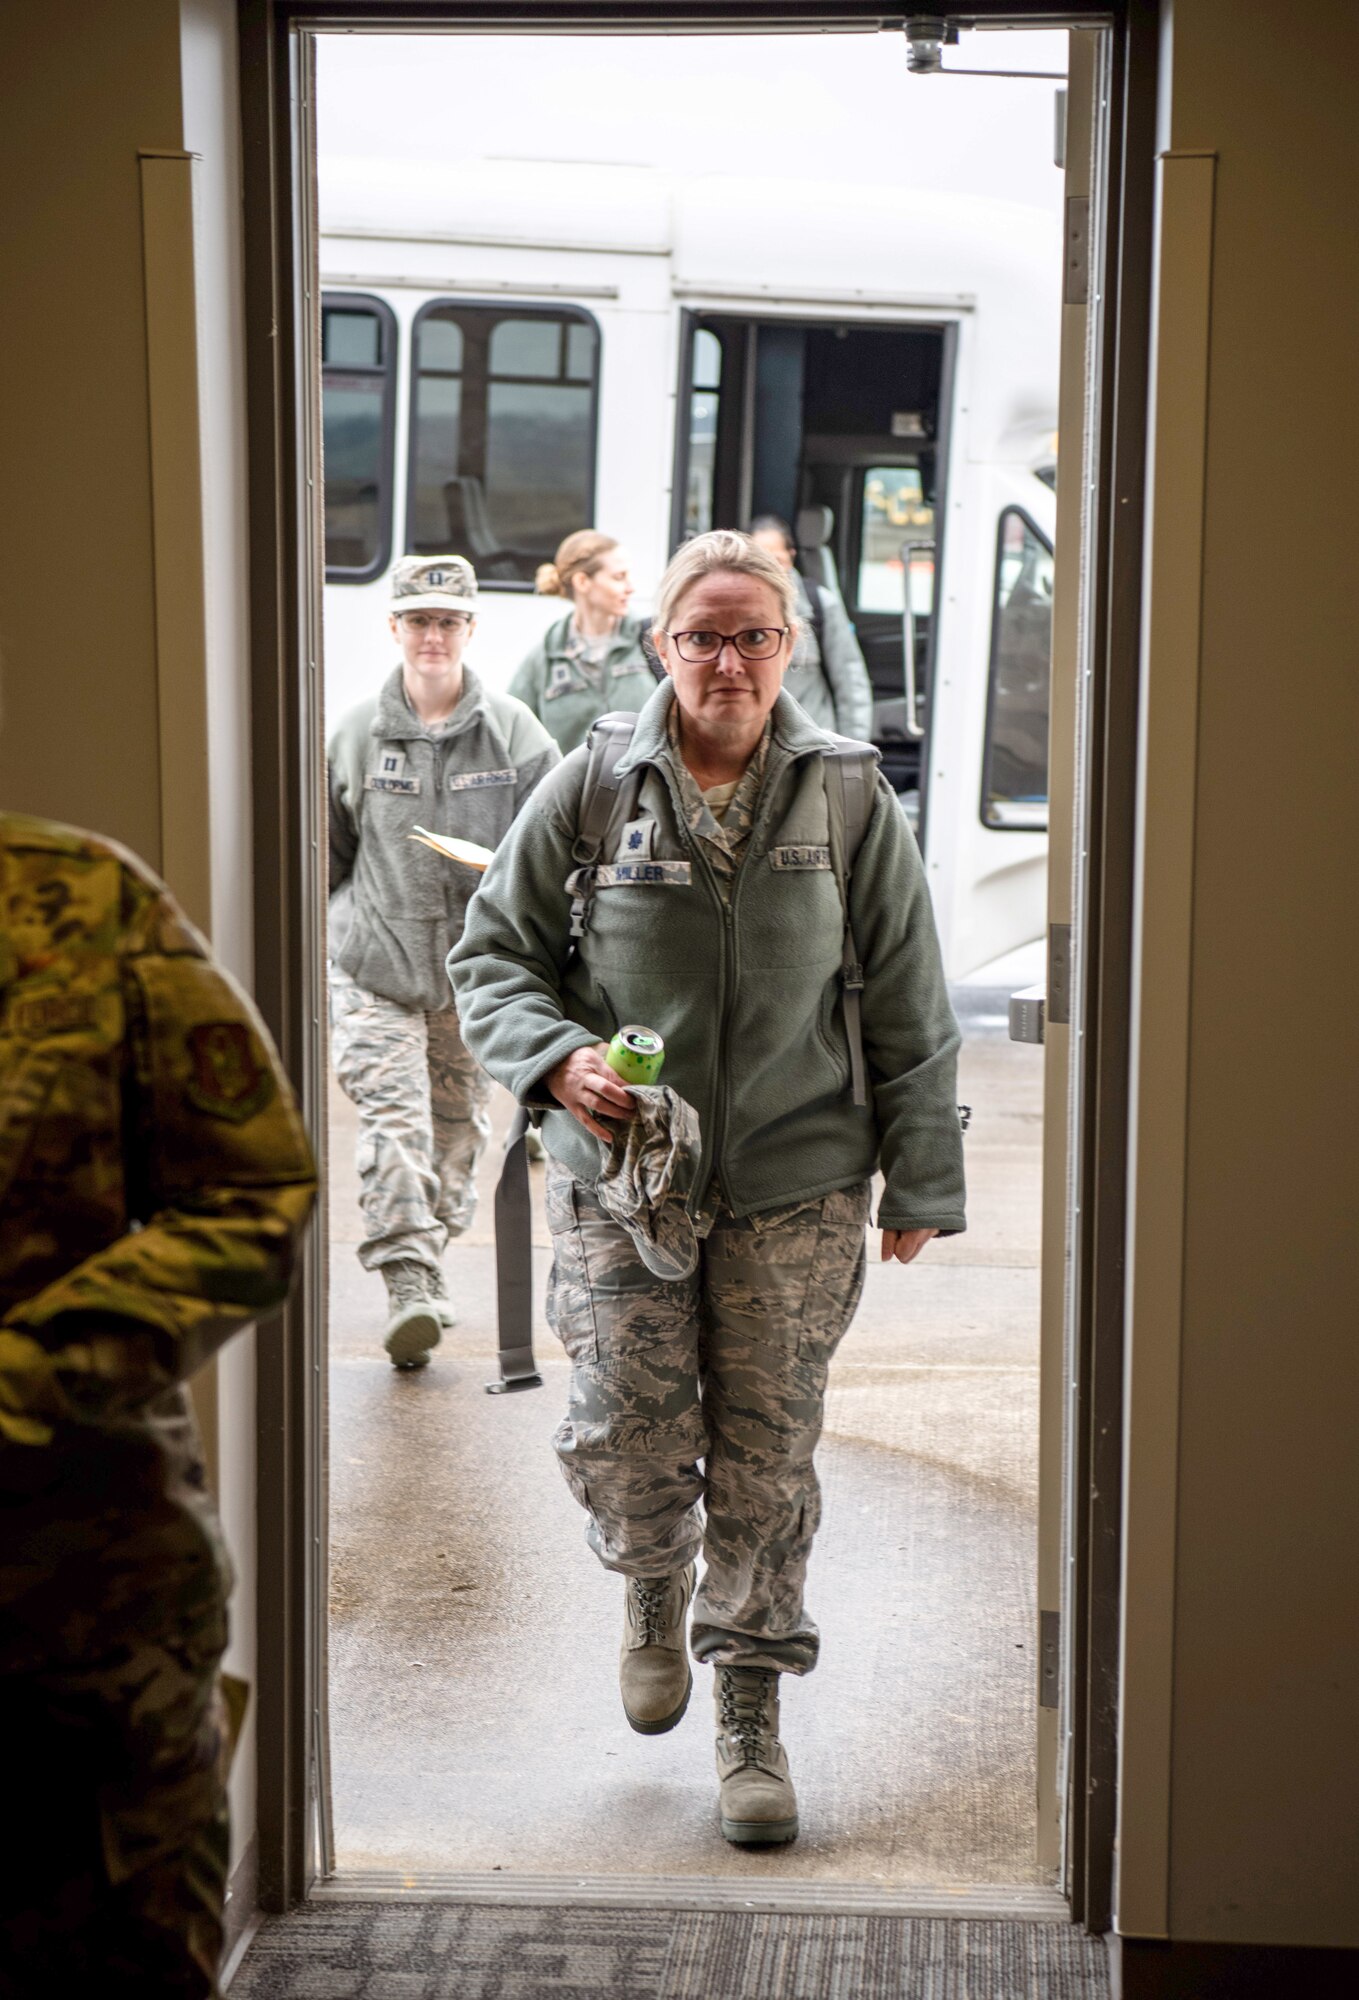 Citizen Airmen from the 445th Airlift Wing’s Aeromedical Staging Squadron, arrive to out-process here April 5, 2020.  The Airmen were notified April 4, 2020 that they would be mobilized to New York City to help with the COVID-19 pandemic. The Citizen Airmen will join other military personnel providing medical services at the Jacob Javits Center in New York City. This deployment is part of a larger mobilization package of more than 120 doctors, nurses and respiratory technicians Air Force Reserve units across the nation provided over the past 48 hours in support of COVID-19 response to take care of Americans. (U.S. Air Force photo/Mr. Patrick O’Reilly)